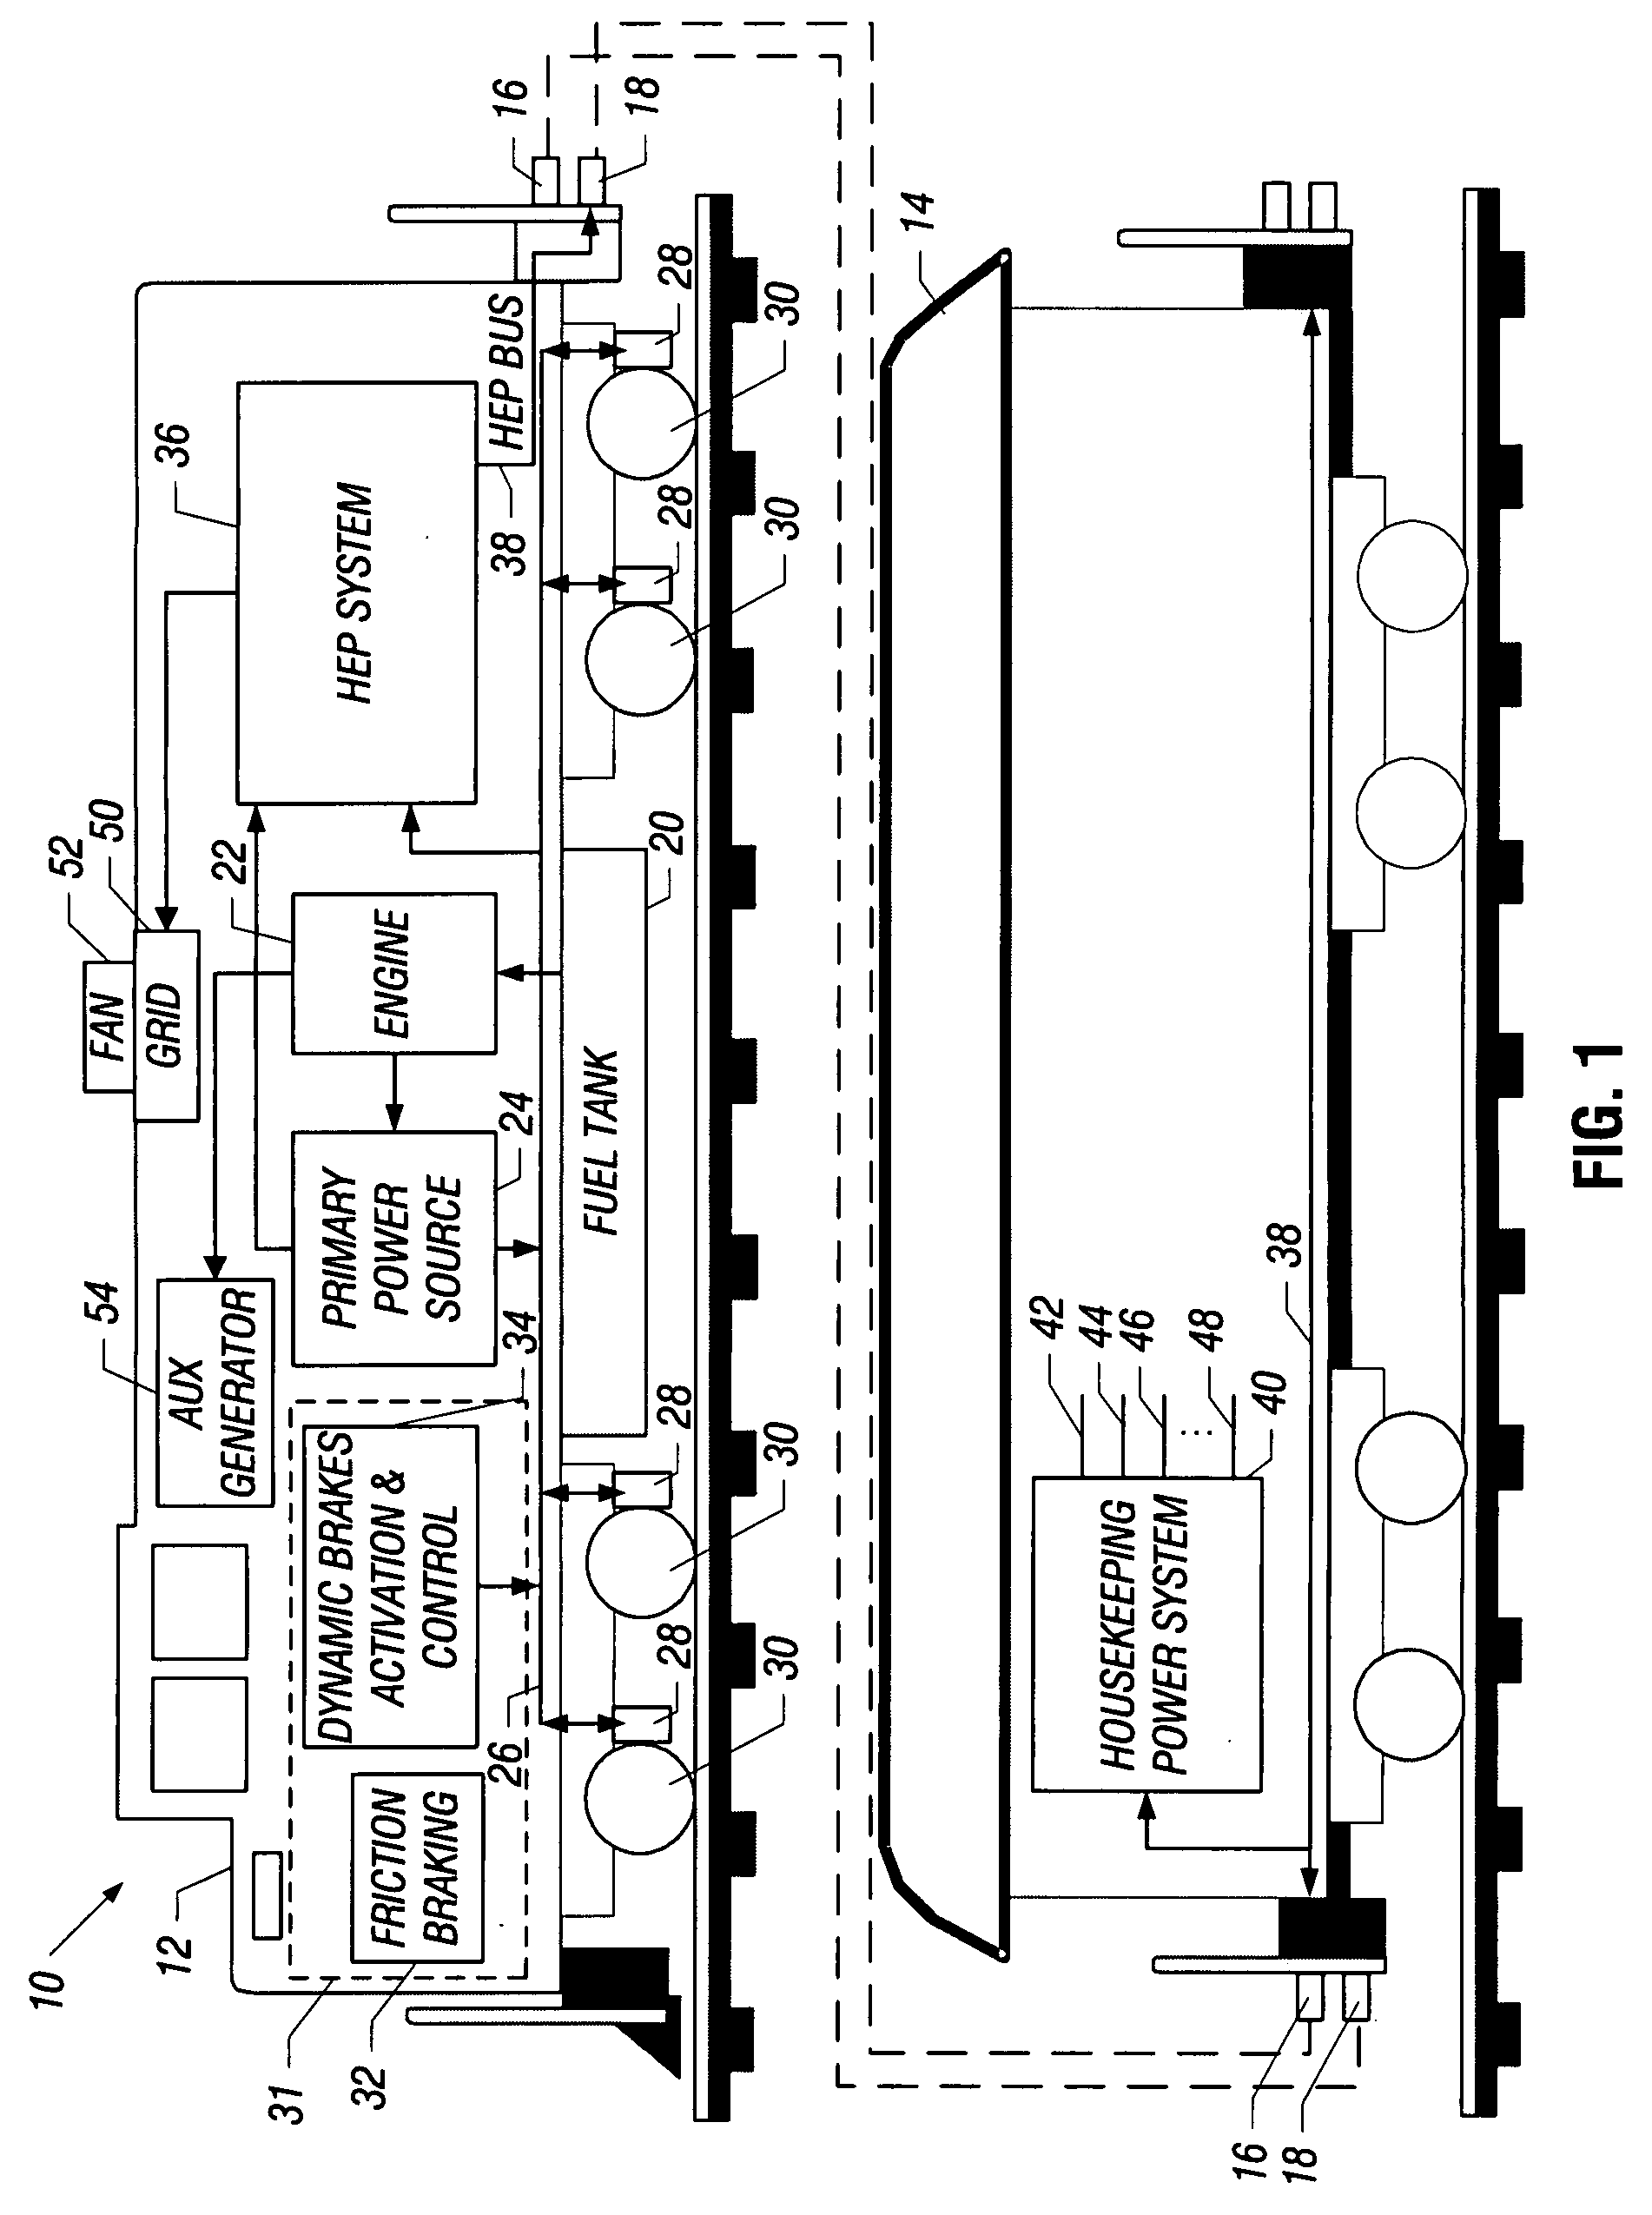 System and method for providing head end power for use in passenger train sets